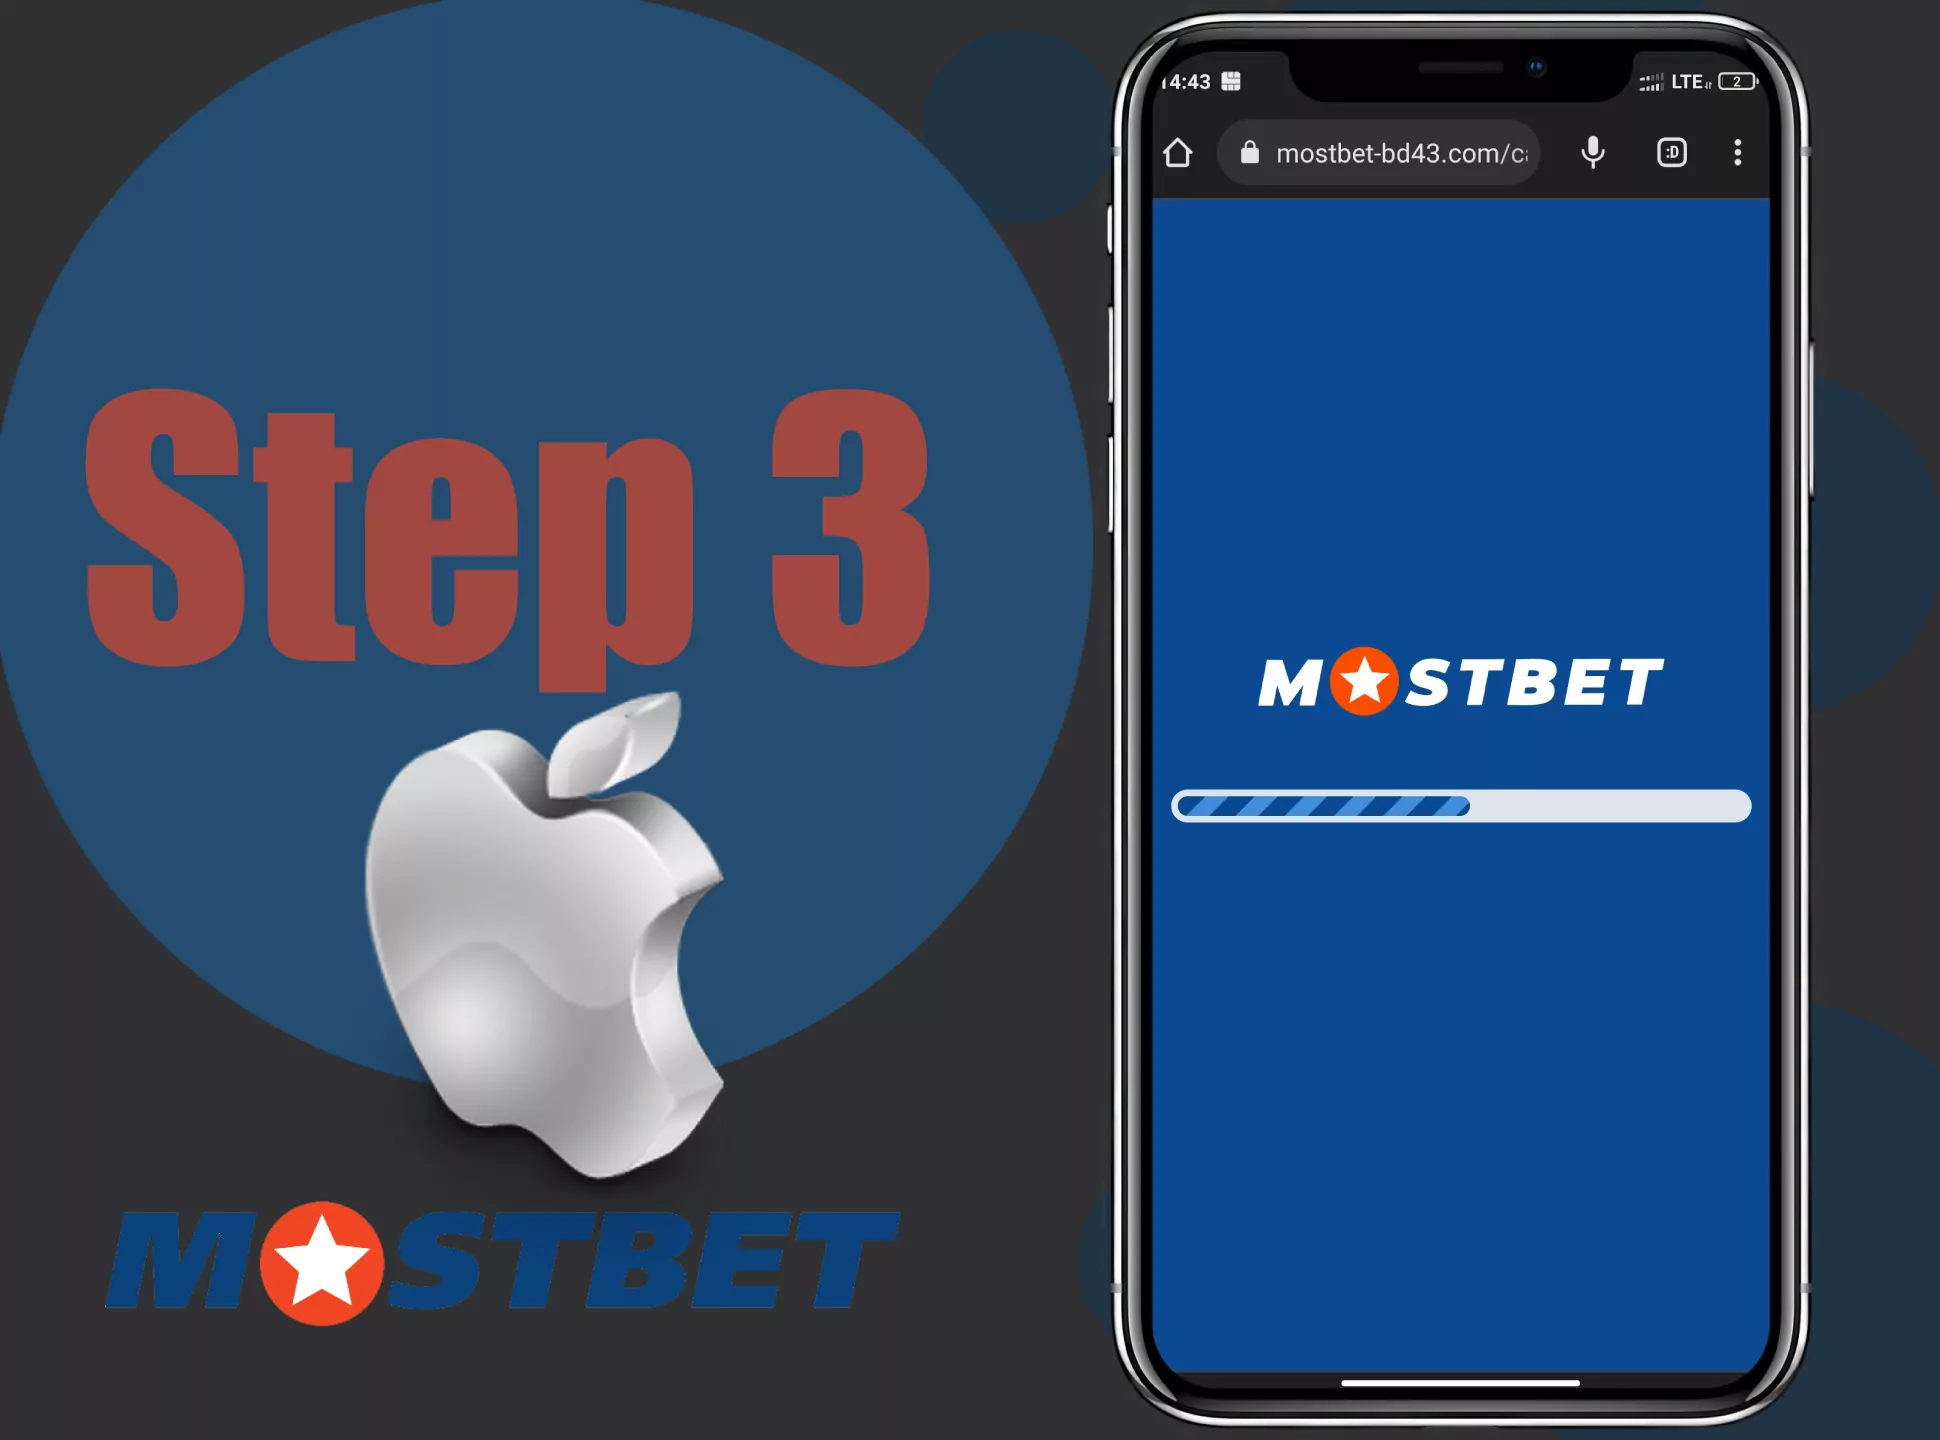 You can download the Mostbet app or play games via your mobile browser.